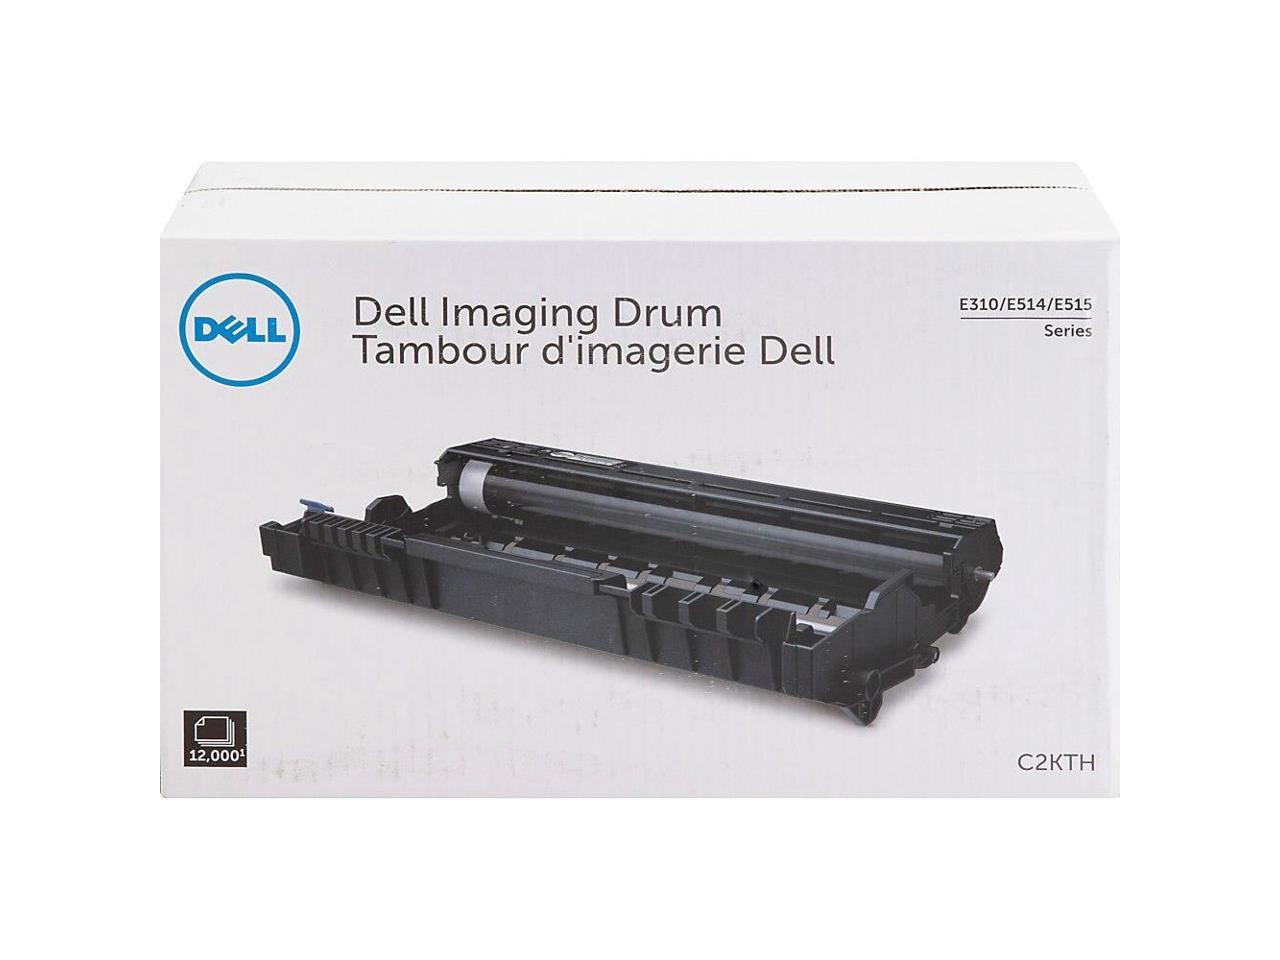 Dell Drum Cartridge C2KTH Dell 12,000 Page Imaging Drum Cartridge for E310dw/ E514dw/ E515dw Printer - 12000 Page - 1 Pack